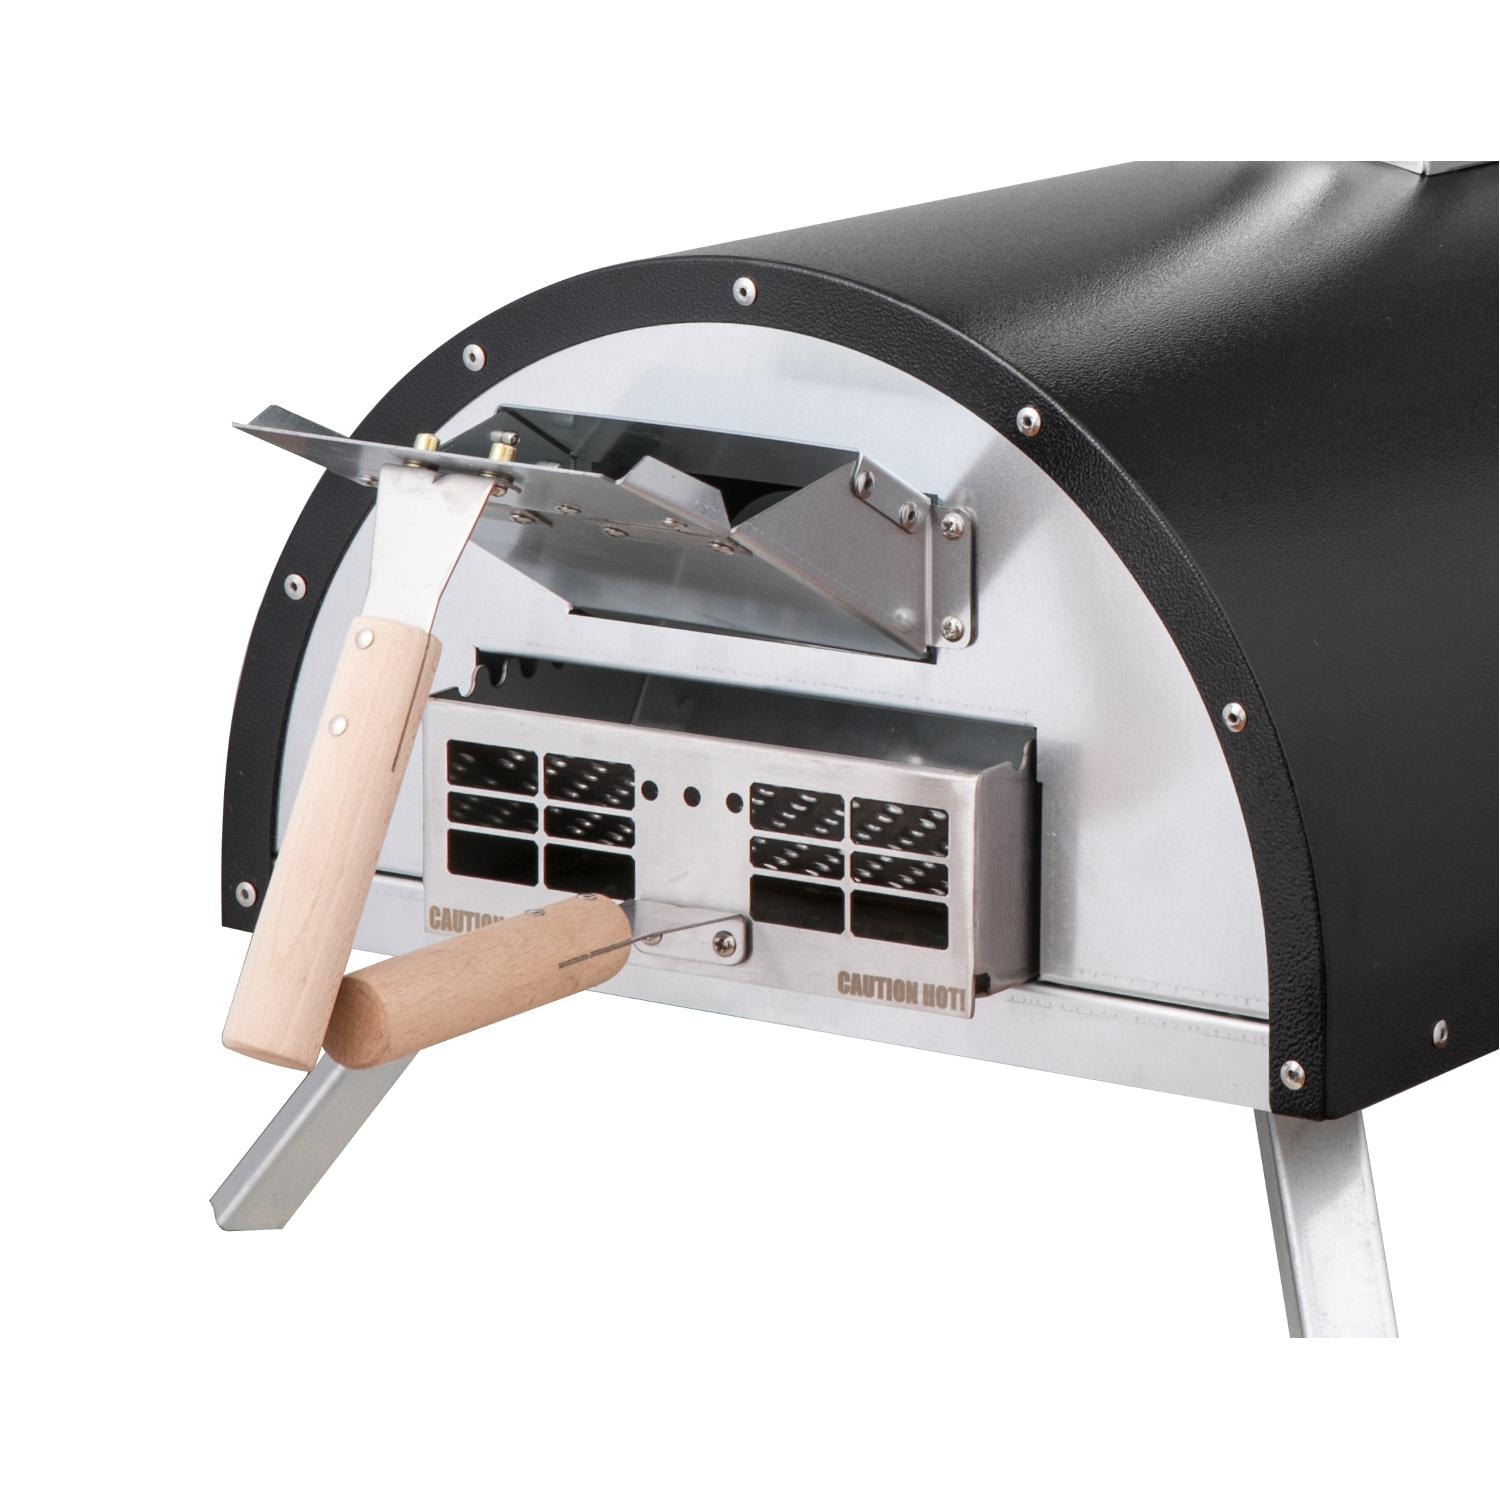 WPPO WKE-01-BLK Le Peppe Portable Wood Fired Pizza Oven, Black - image 2 of 2